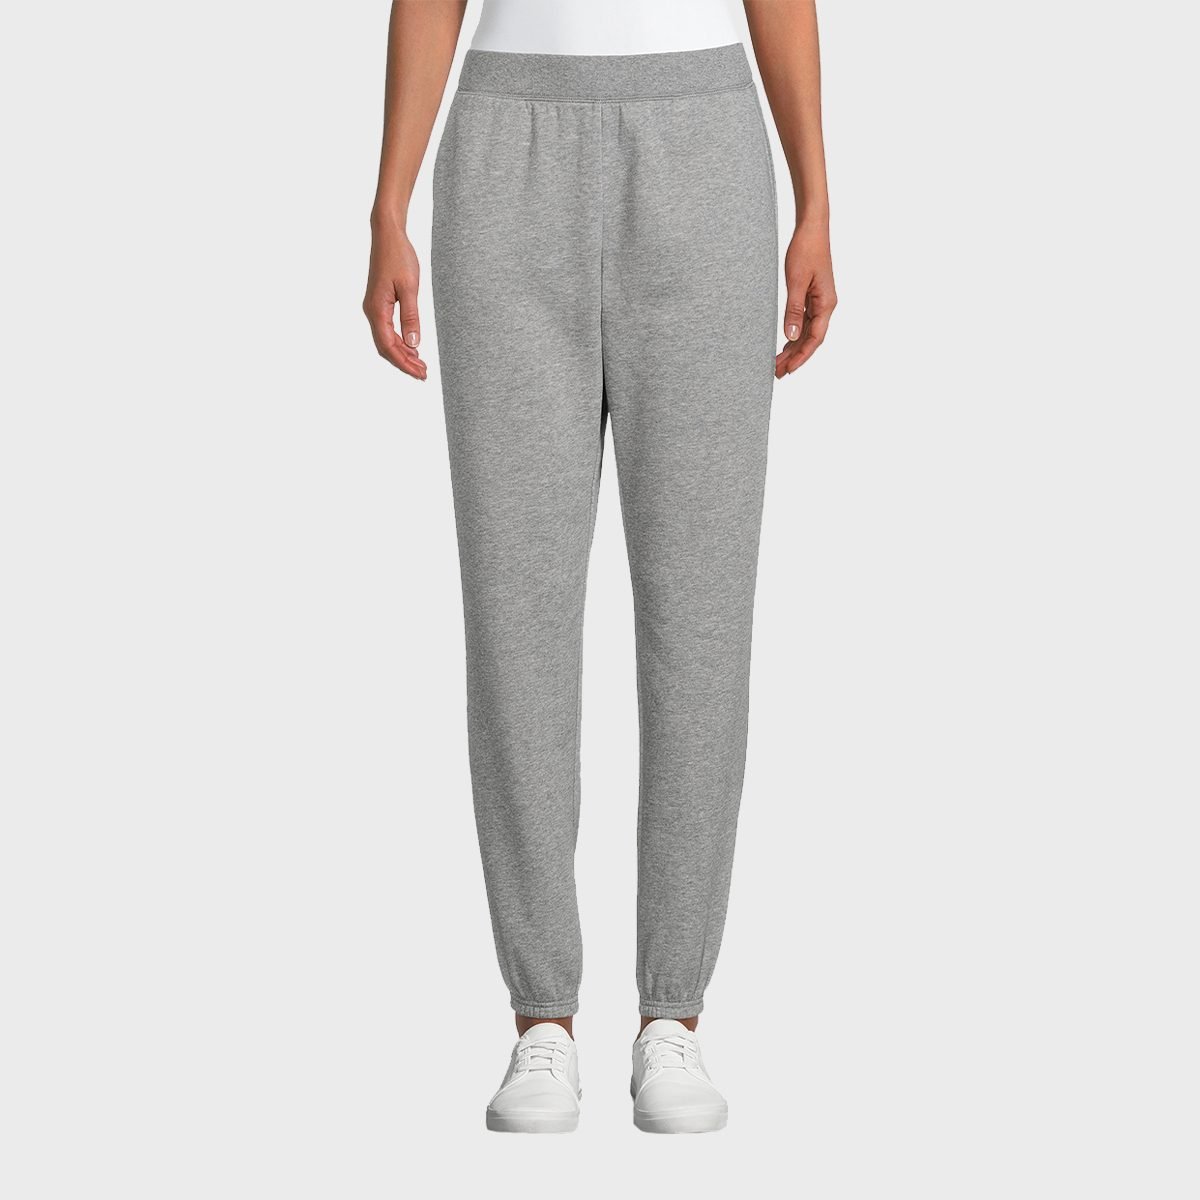 22 Best Joggers for Women of 2023 | Comfy, Stylish Joggers for Women